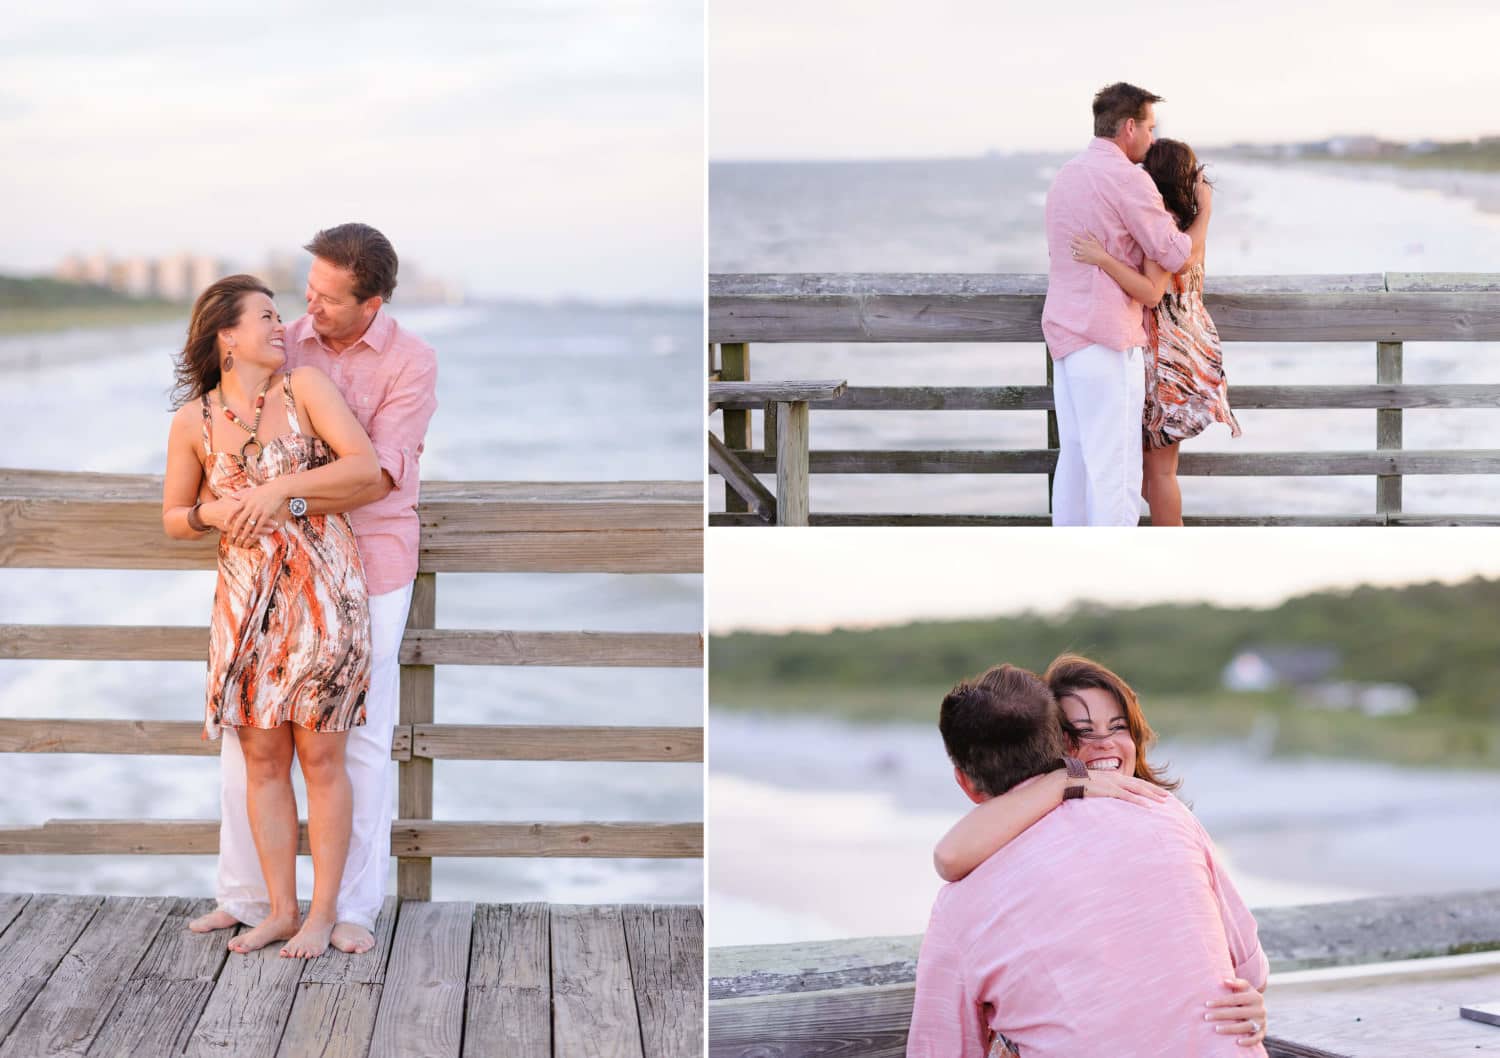 Kissing on the pier - Myrtle Beach State Park